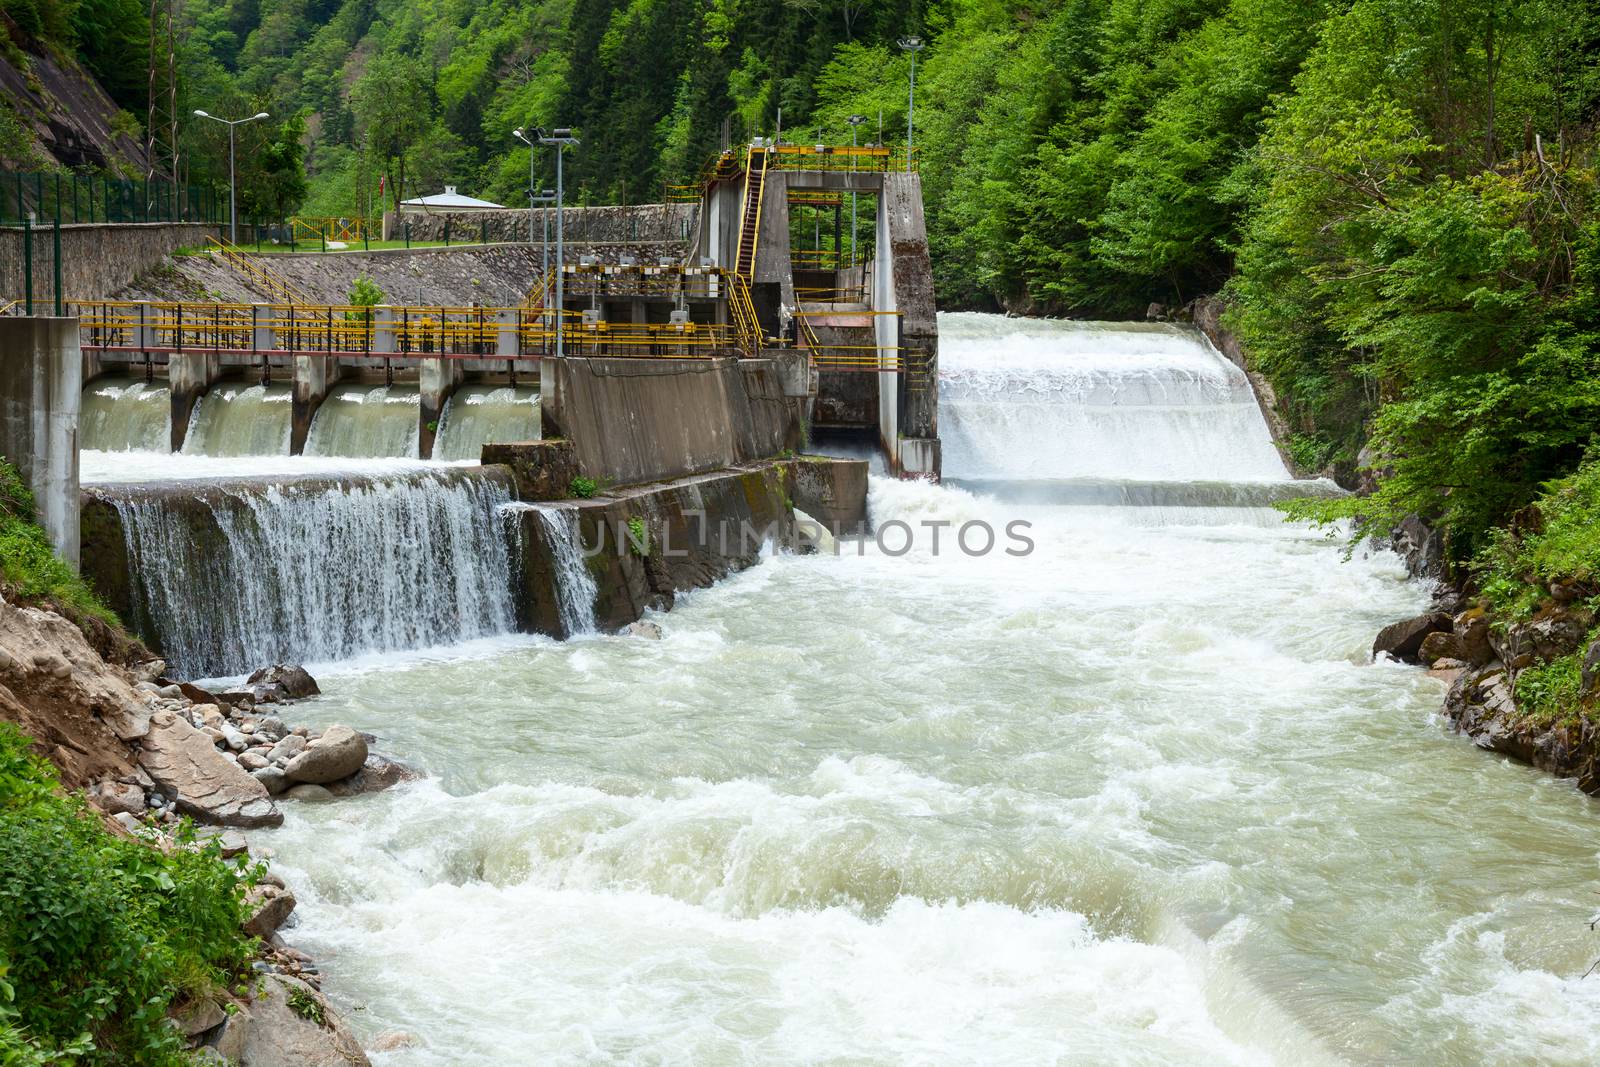 Hydroelectric power station by naumoid